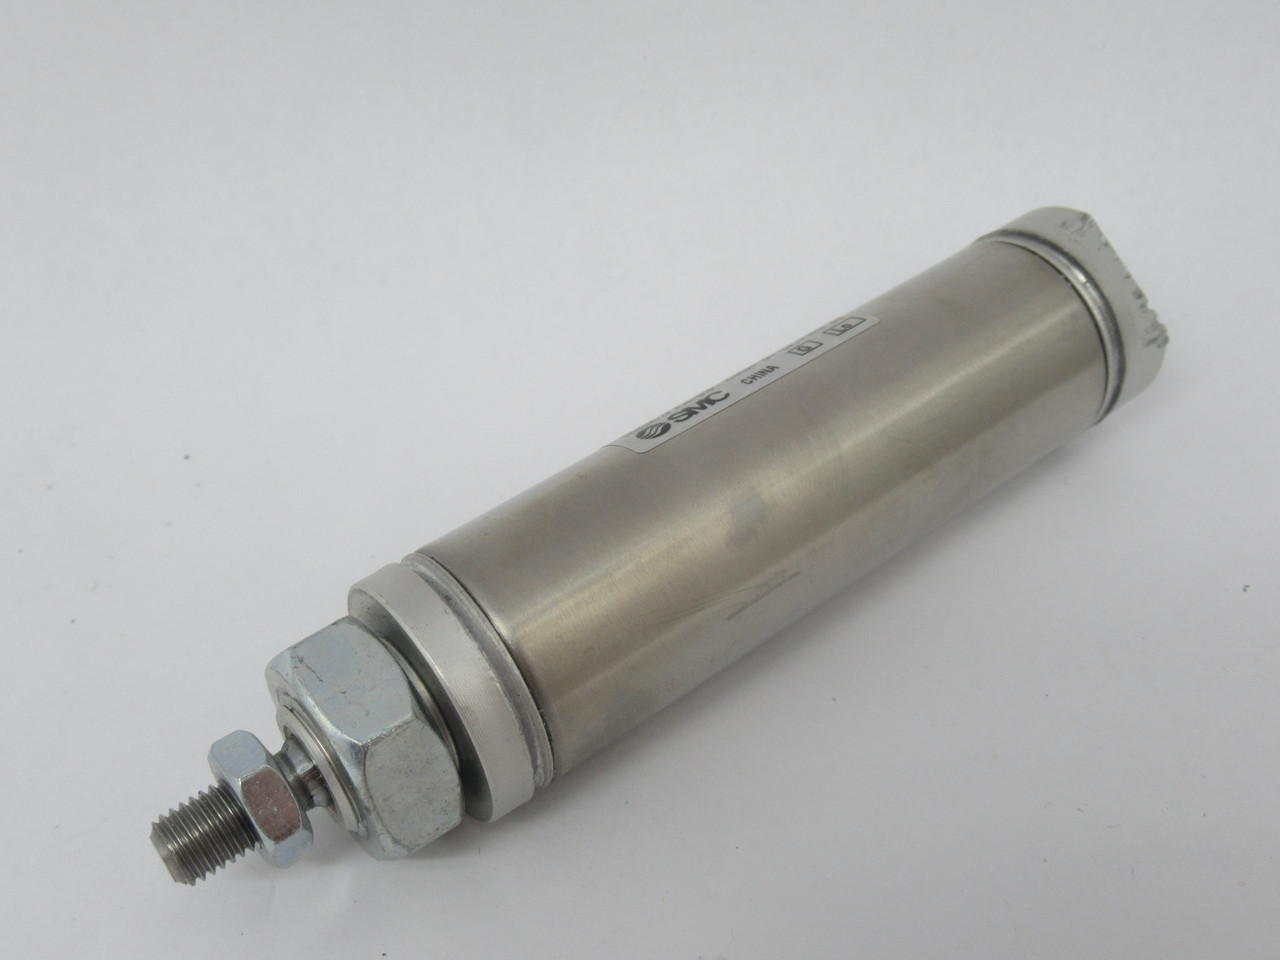 SMC NCMB106-0150S Pneumatic Cylinder 1-1/16" Bore 1-1/2" Stroke USED